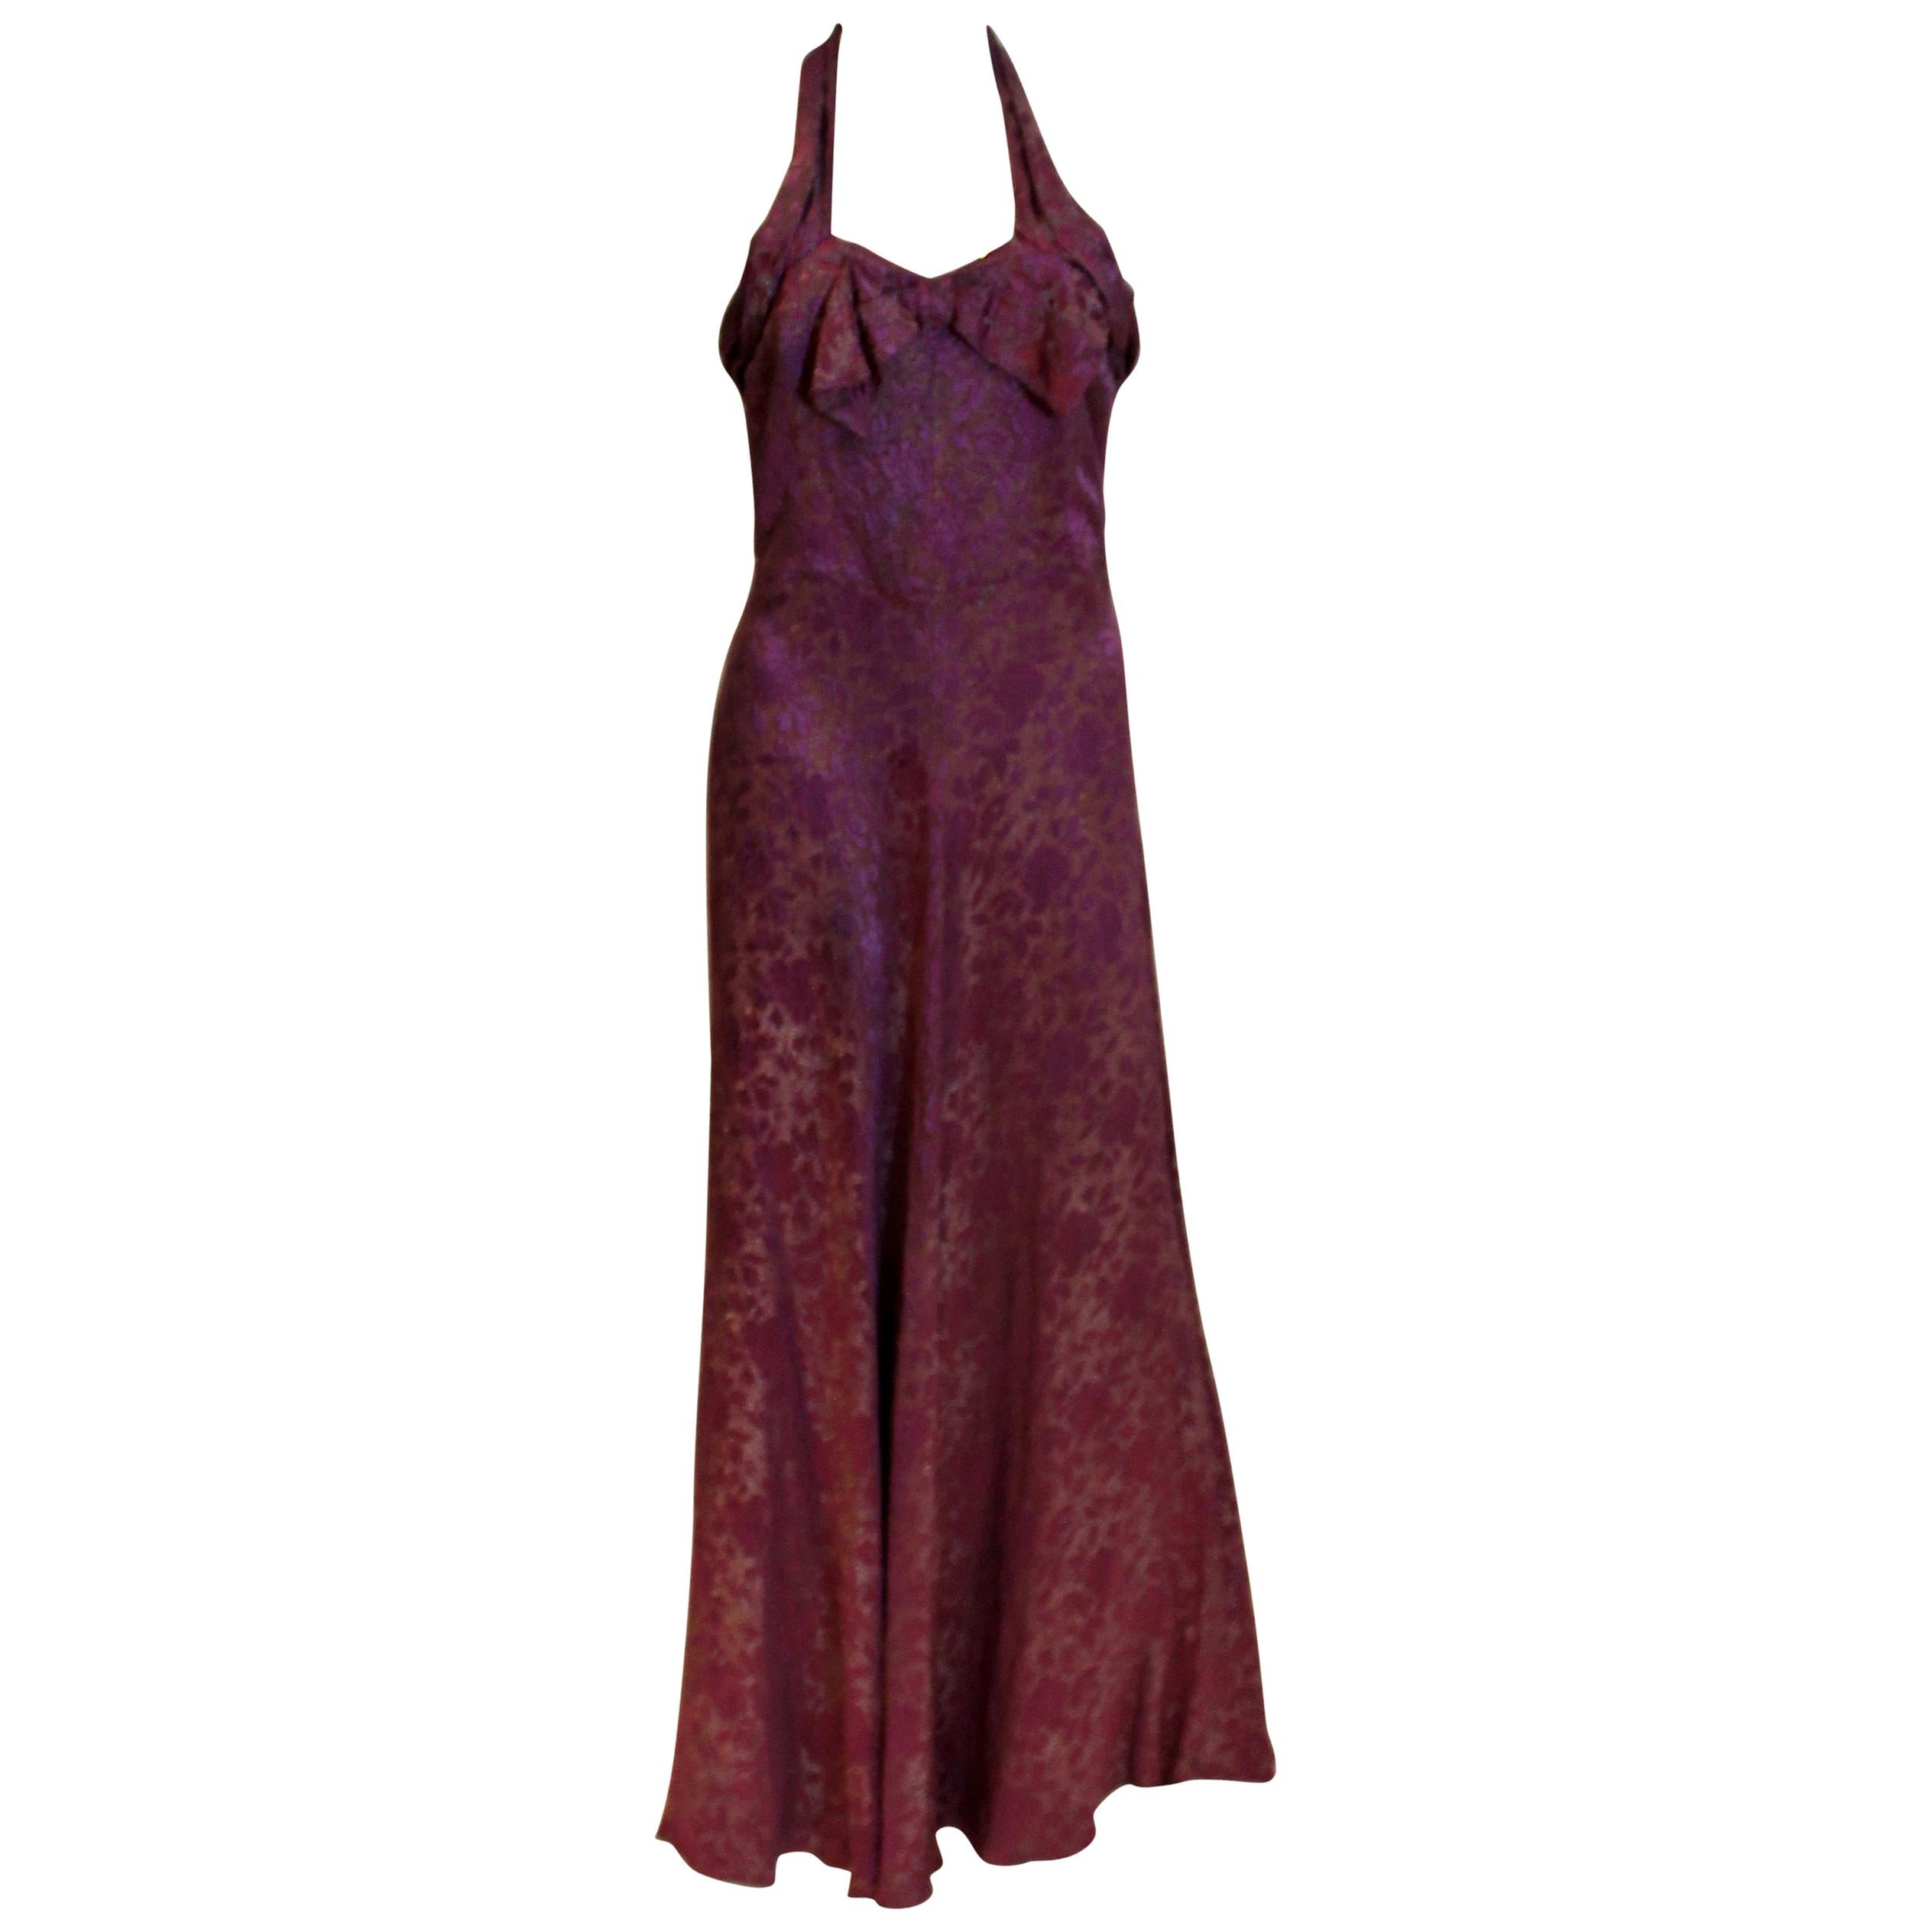  Vintage 1930s Purple Lame Gown by Elvena For Sale